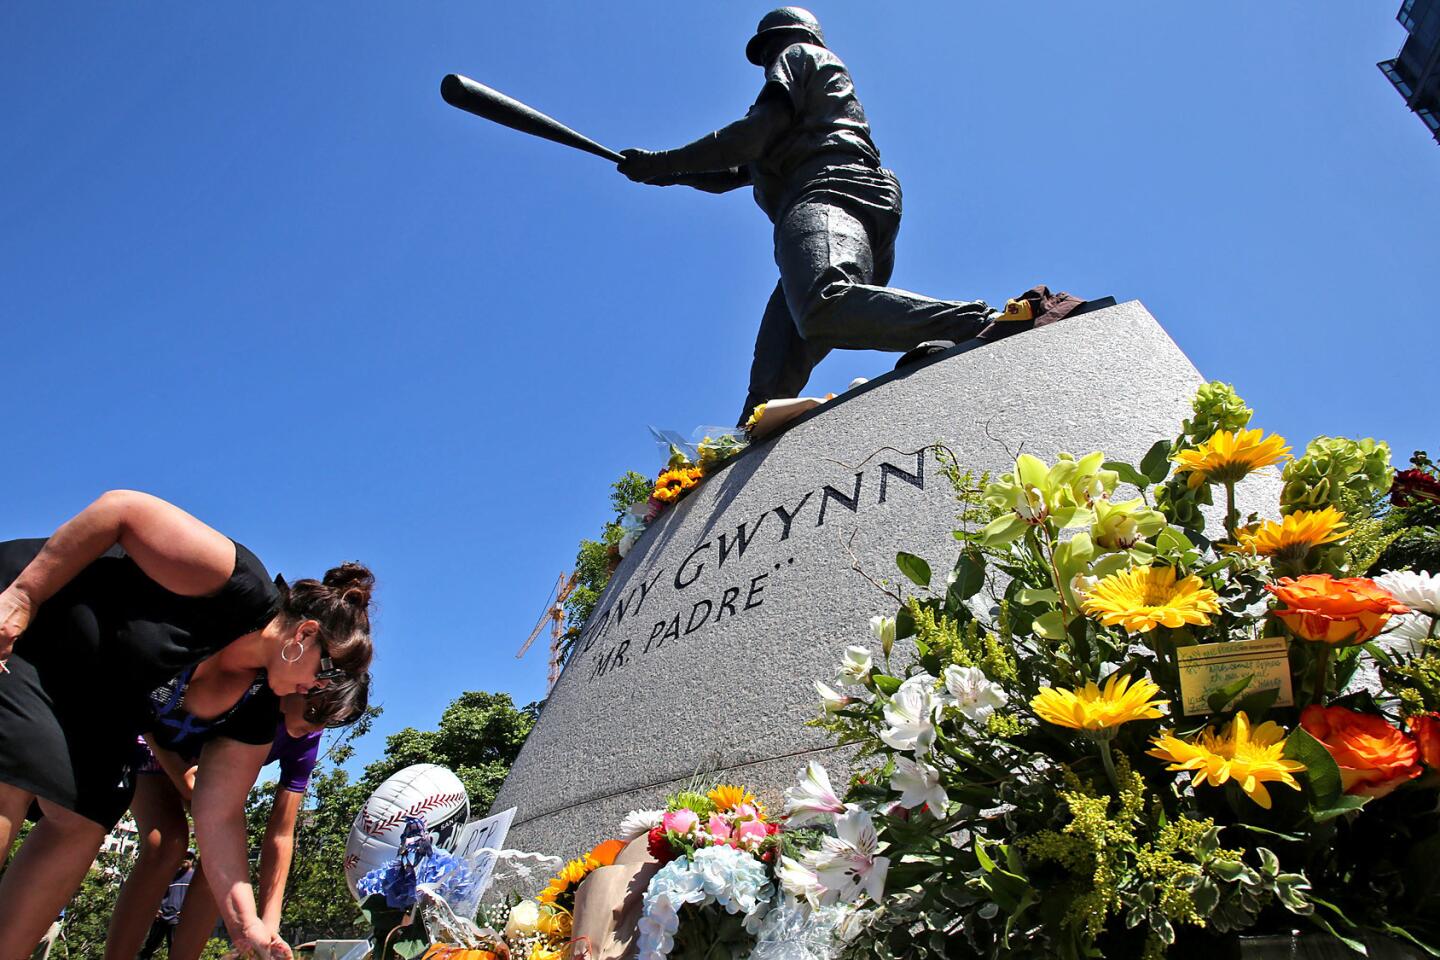 Hall of Famer Tony Gwynn, Padres' wizard with a bat, dies at 54, Notable  Obituaries